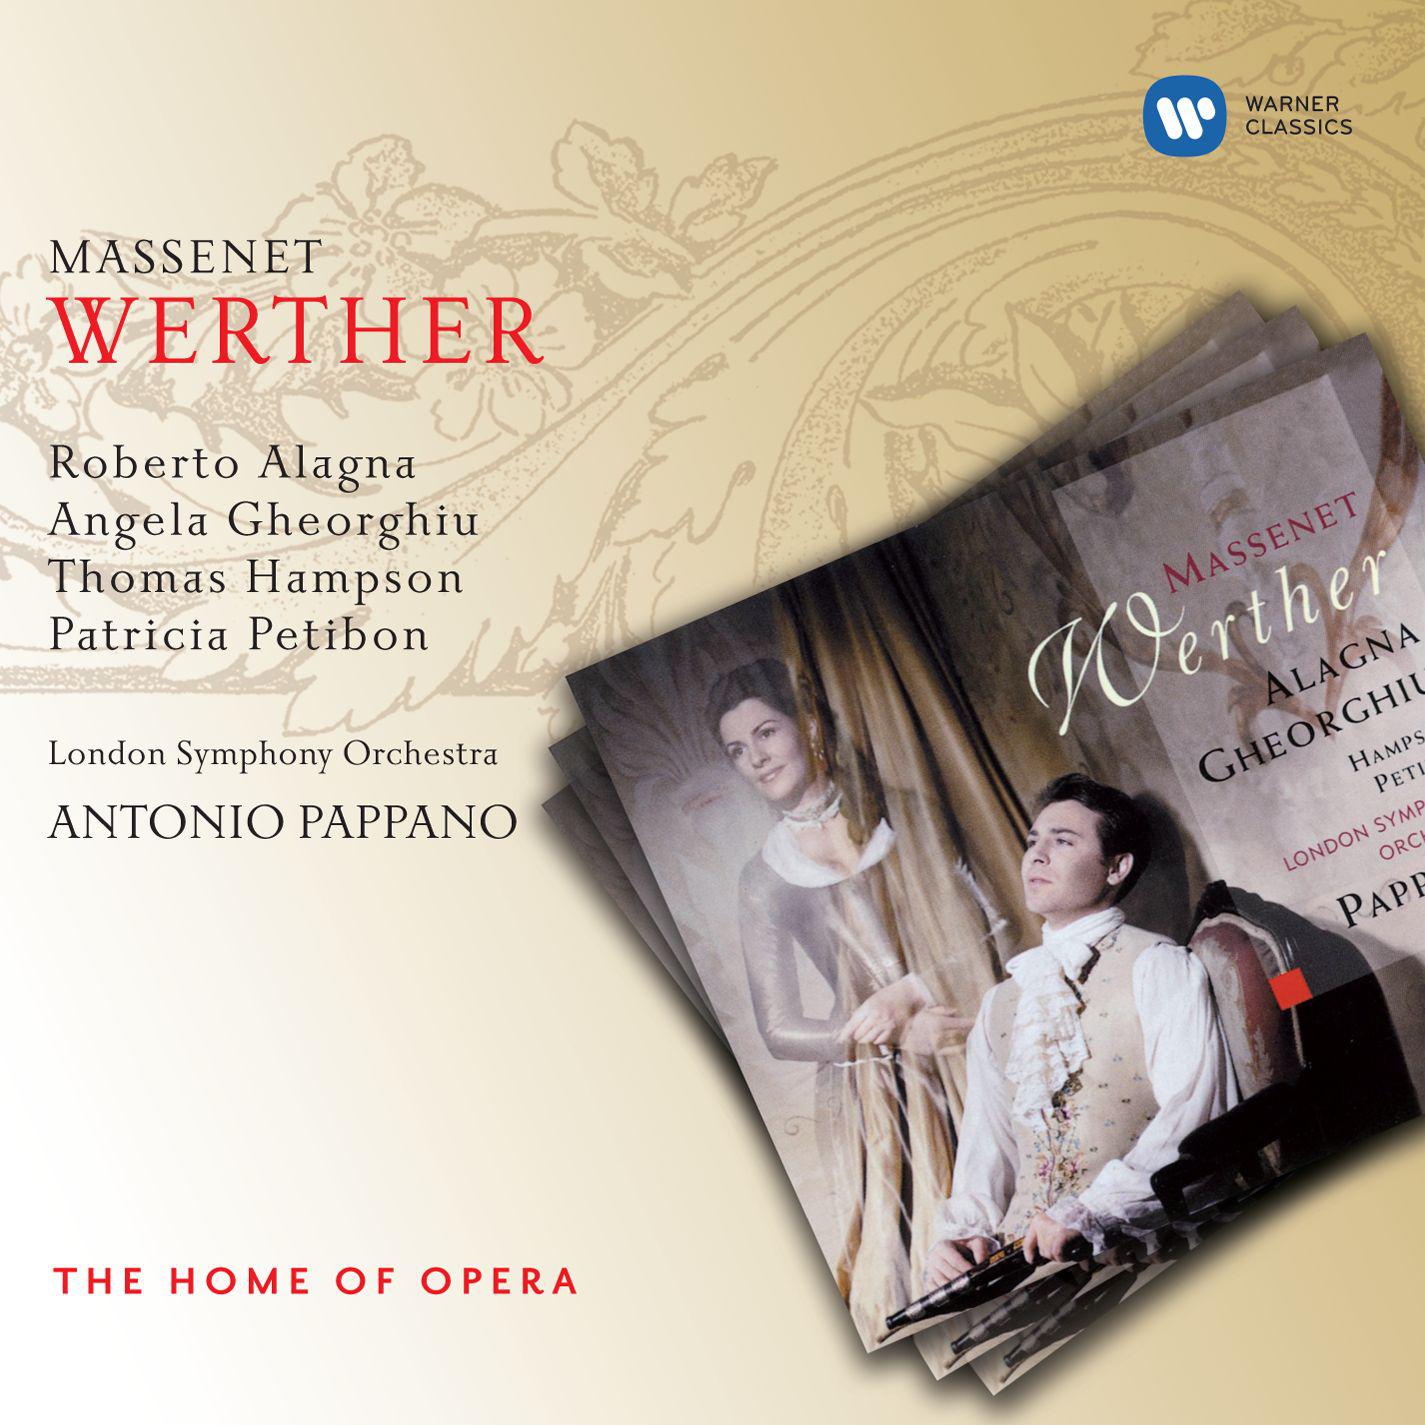 Werther, Act 1: Pre lude